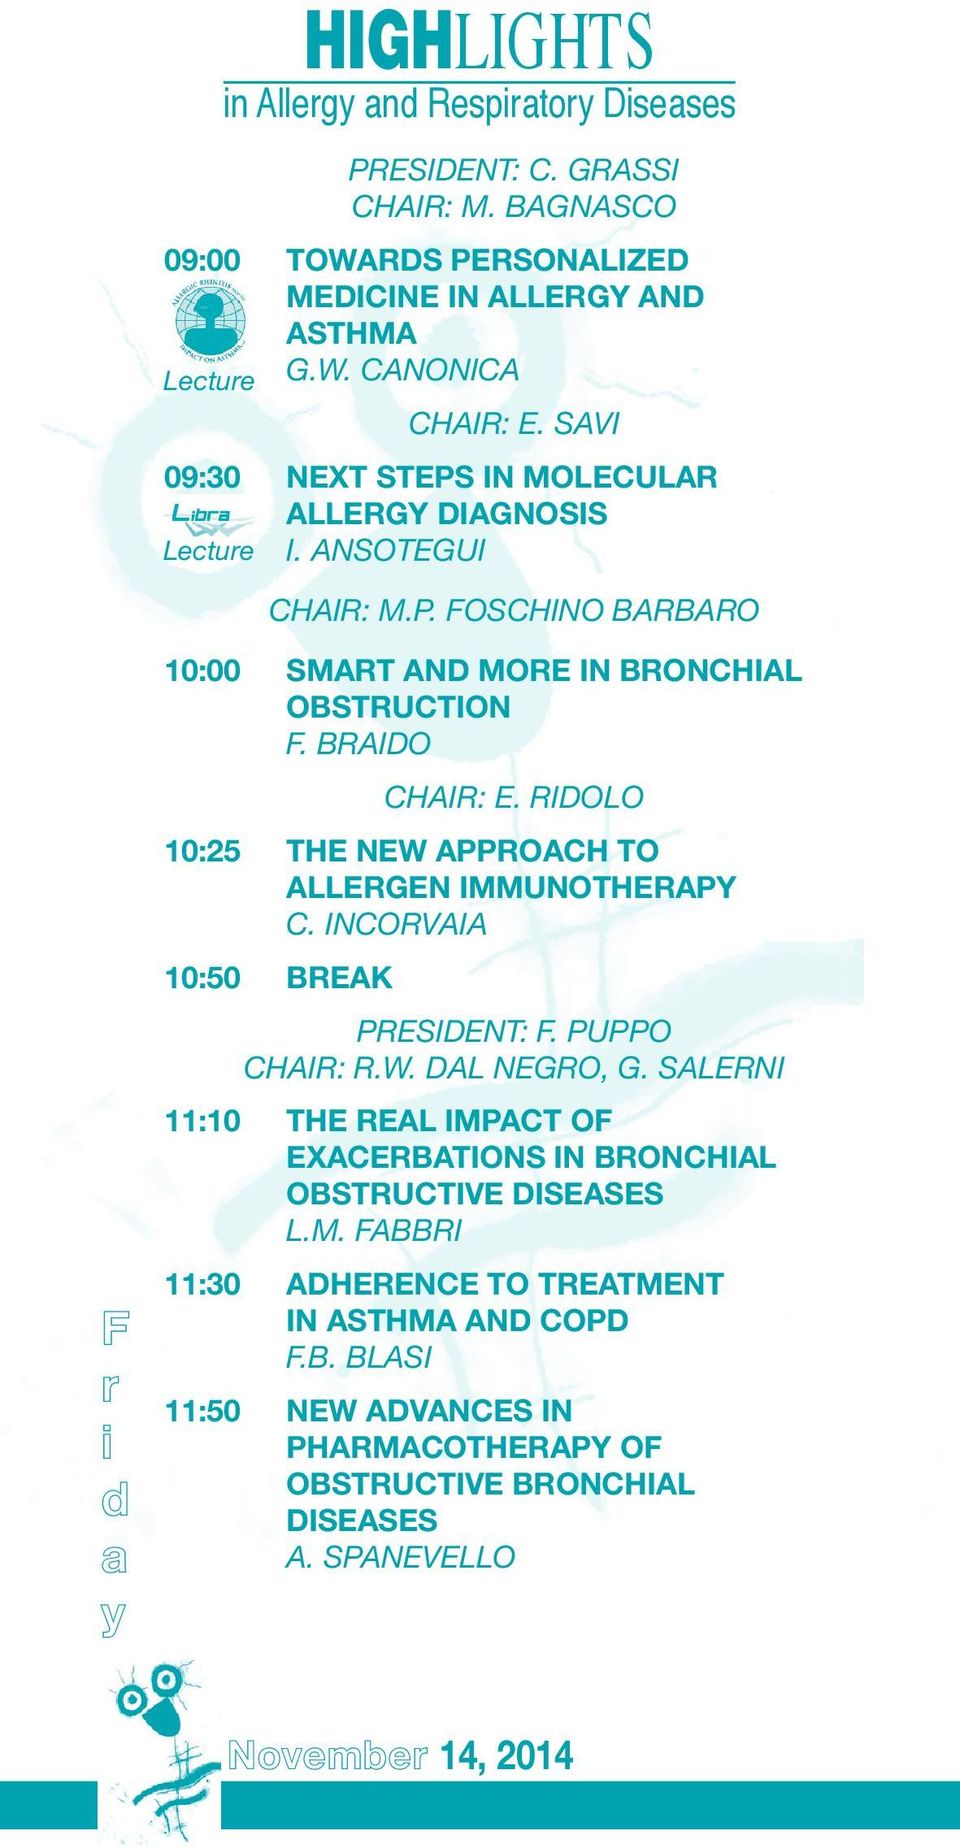 RIDOLO 10:25 THE NEW APPROACH TO ALLERGEN IMMUNOTHERAPY C. INCORVAIA 10:50 BREAK PRESIDENT: F. PUPPO CHAIR: R.W. DAL NEGRO, G.